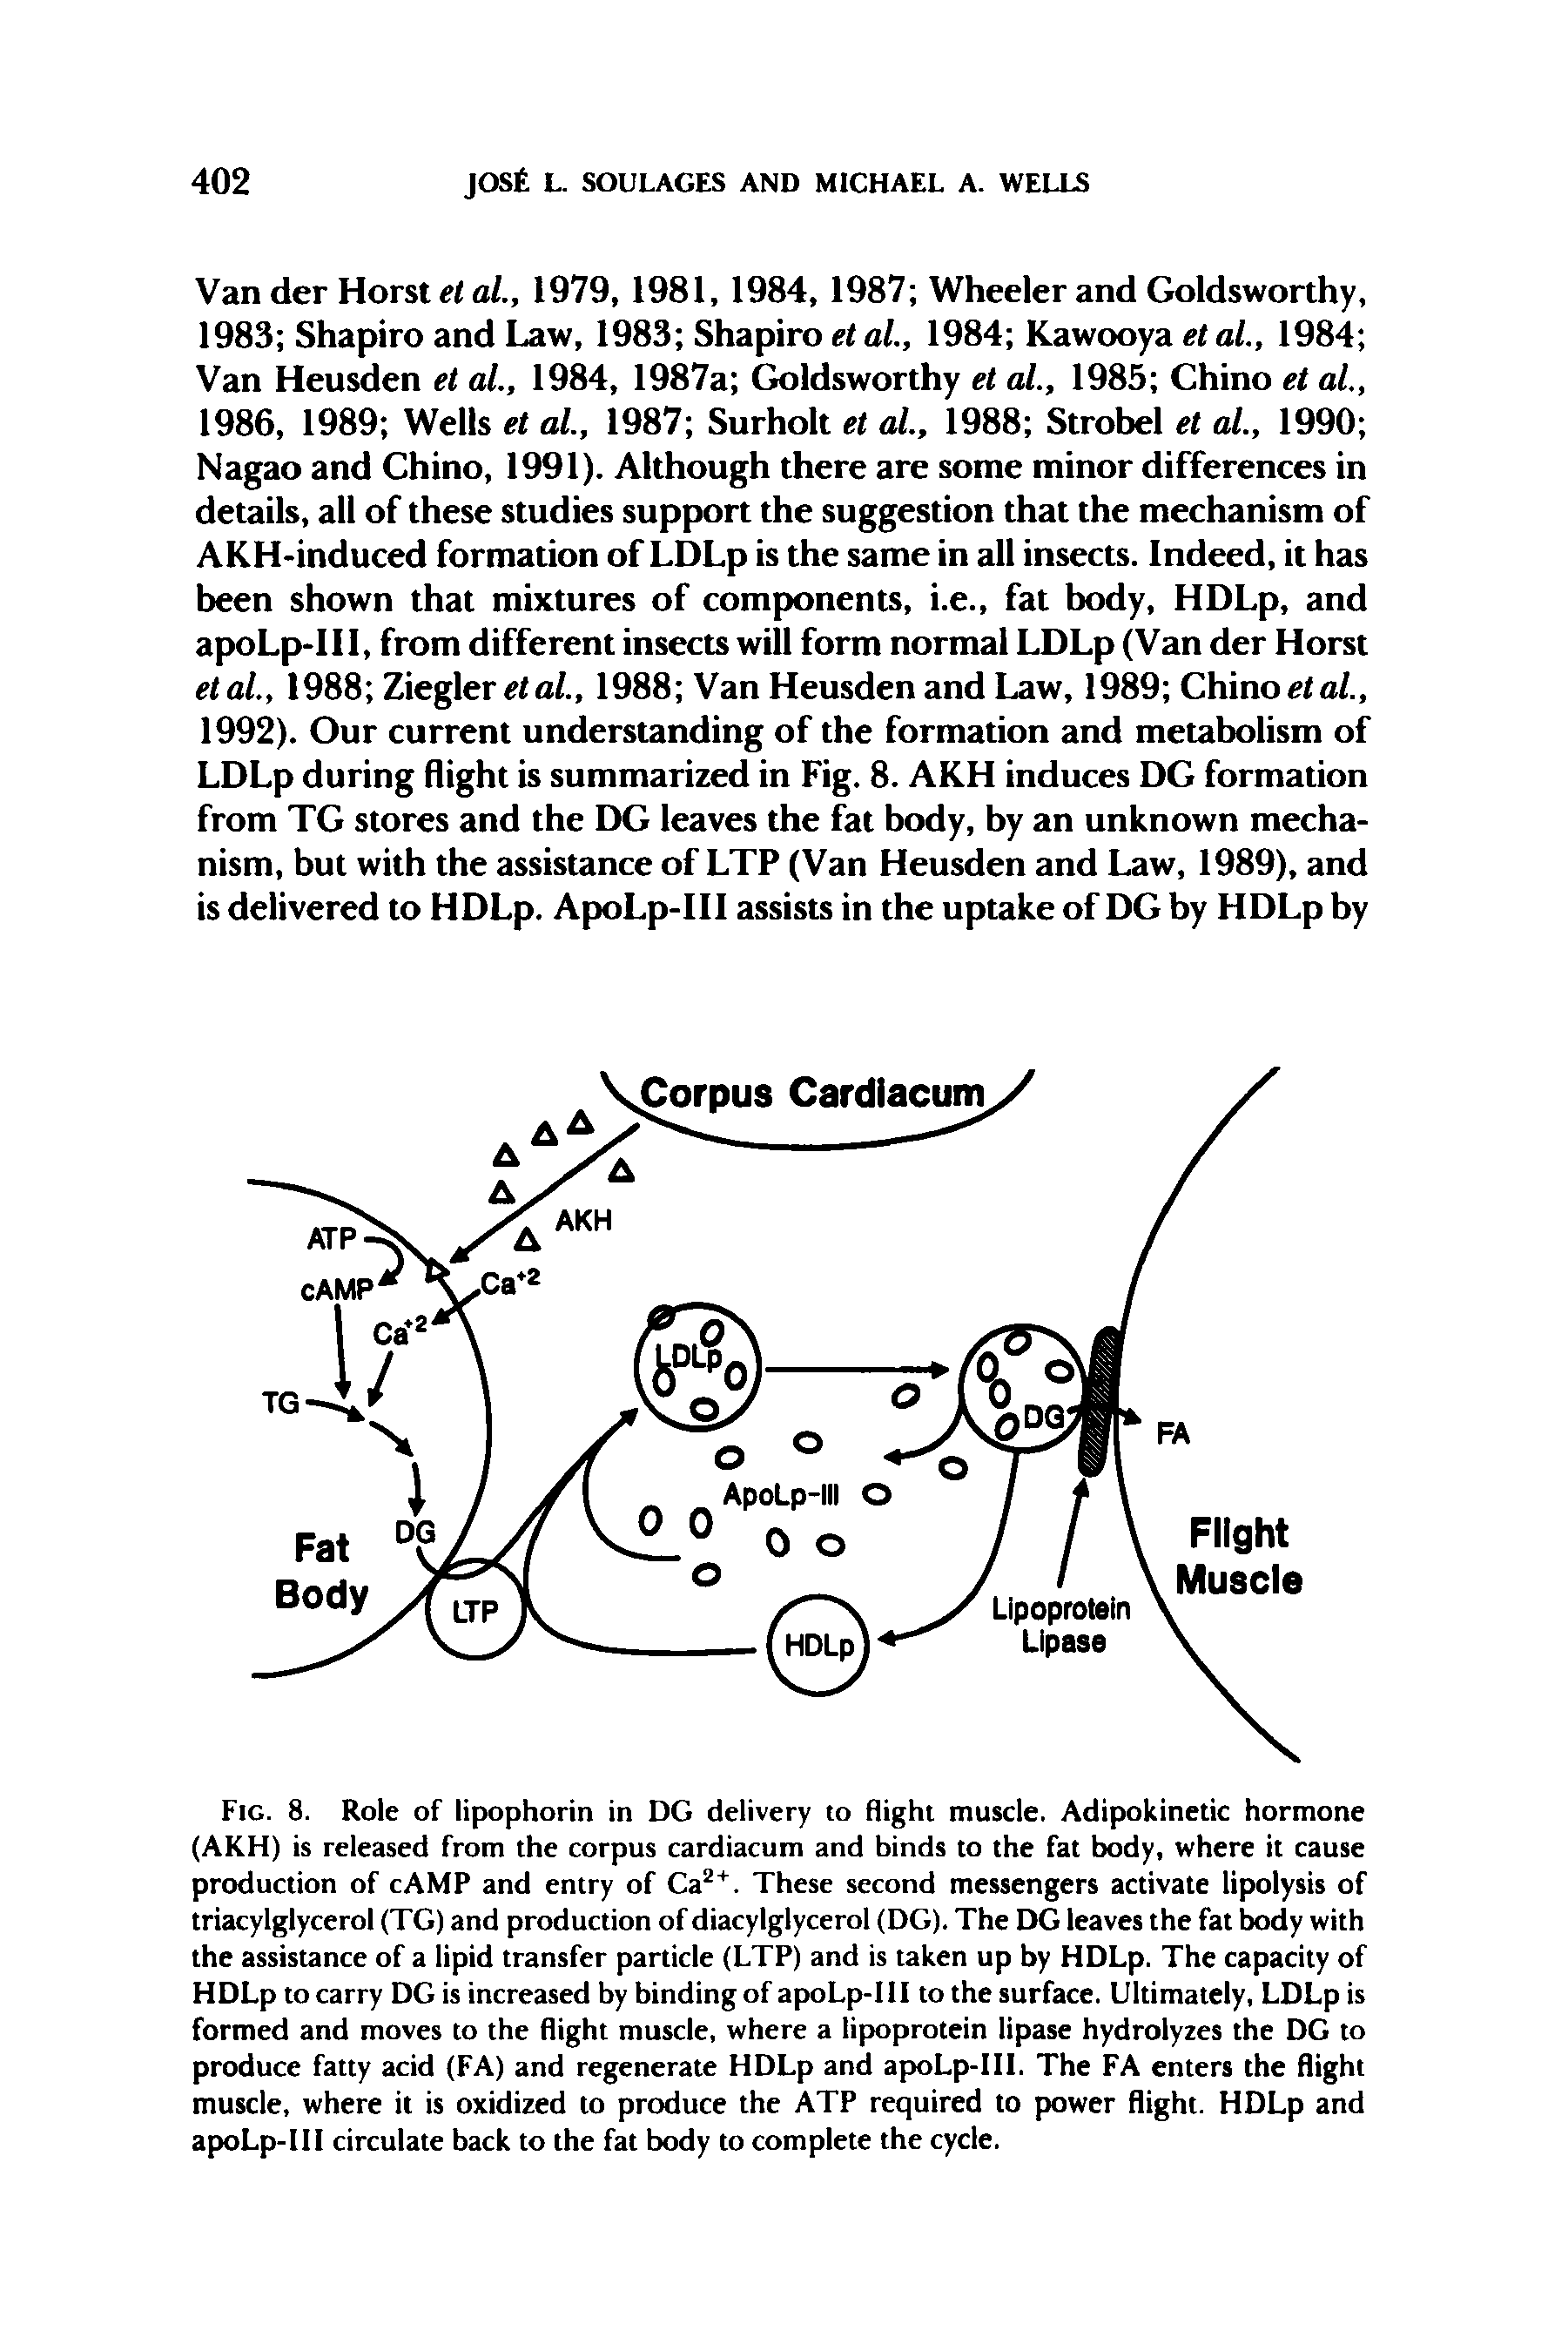 Fig. 8. Role of lipophorin in DG delivery to flight muscle. Adipokinetic hormone (AKH) is released from the corpus cardiacum and binds to the fat body, where it cause production of cAMP and entry of Ca . These second messengers activate lipolysis of triacylglycerol (TG) and production of diacylglycerol (DG). The DG leaves the fat body with the assistance of a lipid transfer particle (LTP) and is taken up by HDLp. The capacity of HDLp to carry DG is increased by binding of apoLp-HI to the surface. Ultimately, LDLp is formed and moves to the flight muscle, where a lipoprotein lipase hydrolyzes the DG to produce fatty acid (FA) and regenerate HDLp and apoLp-IIl. The FA enters the flight muscle, where it is oxidized to produce the ATP required to power flight. HDLp and apoLp-HI circulate back to the fat body to complete the cycle.